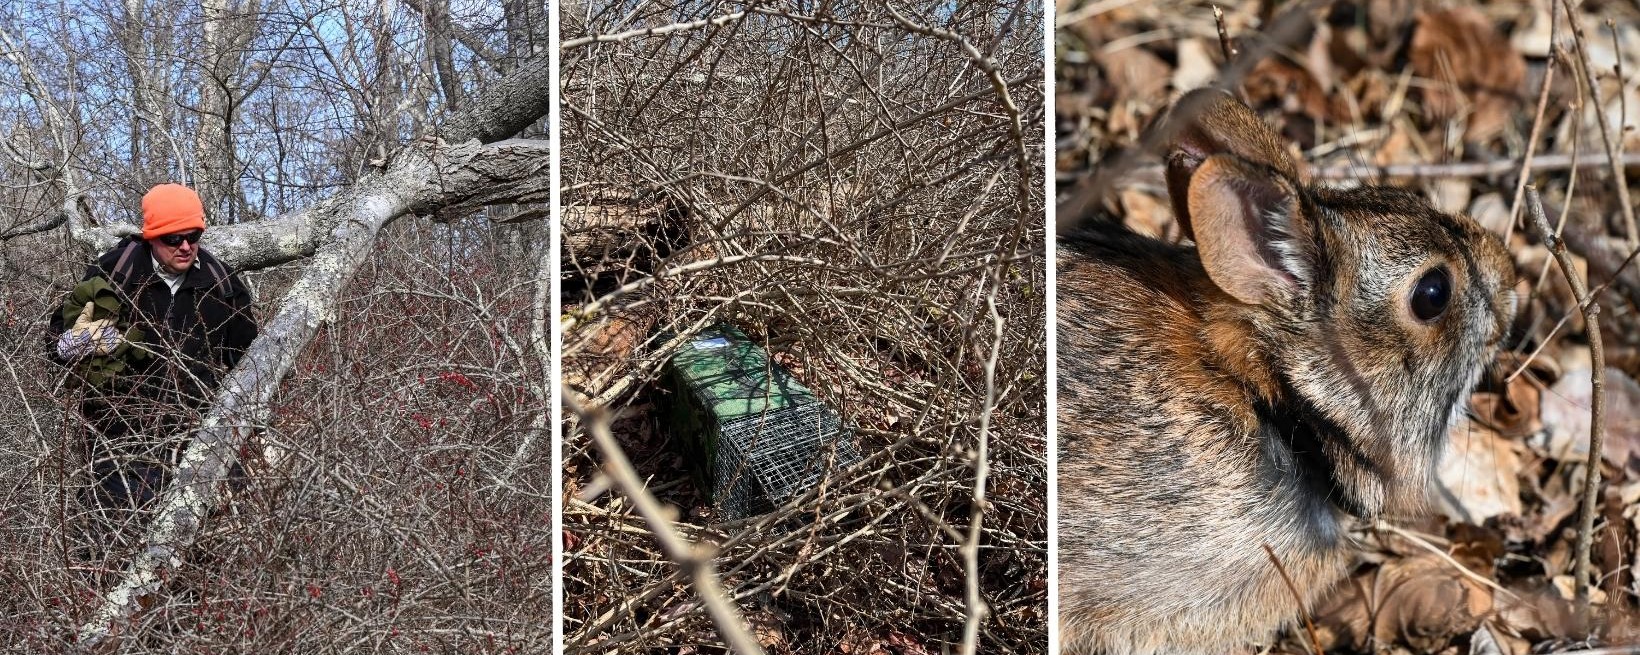 Working in New England cottontail habitat